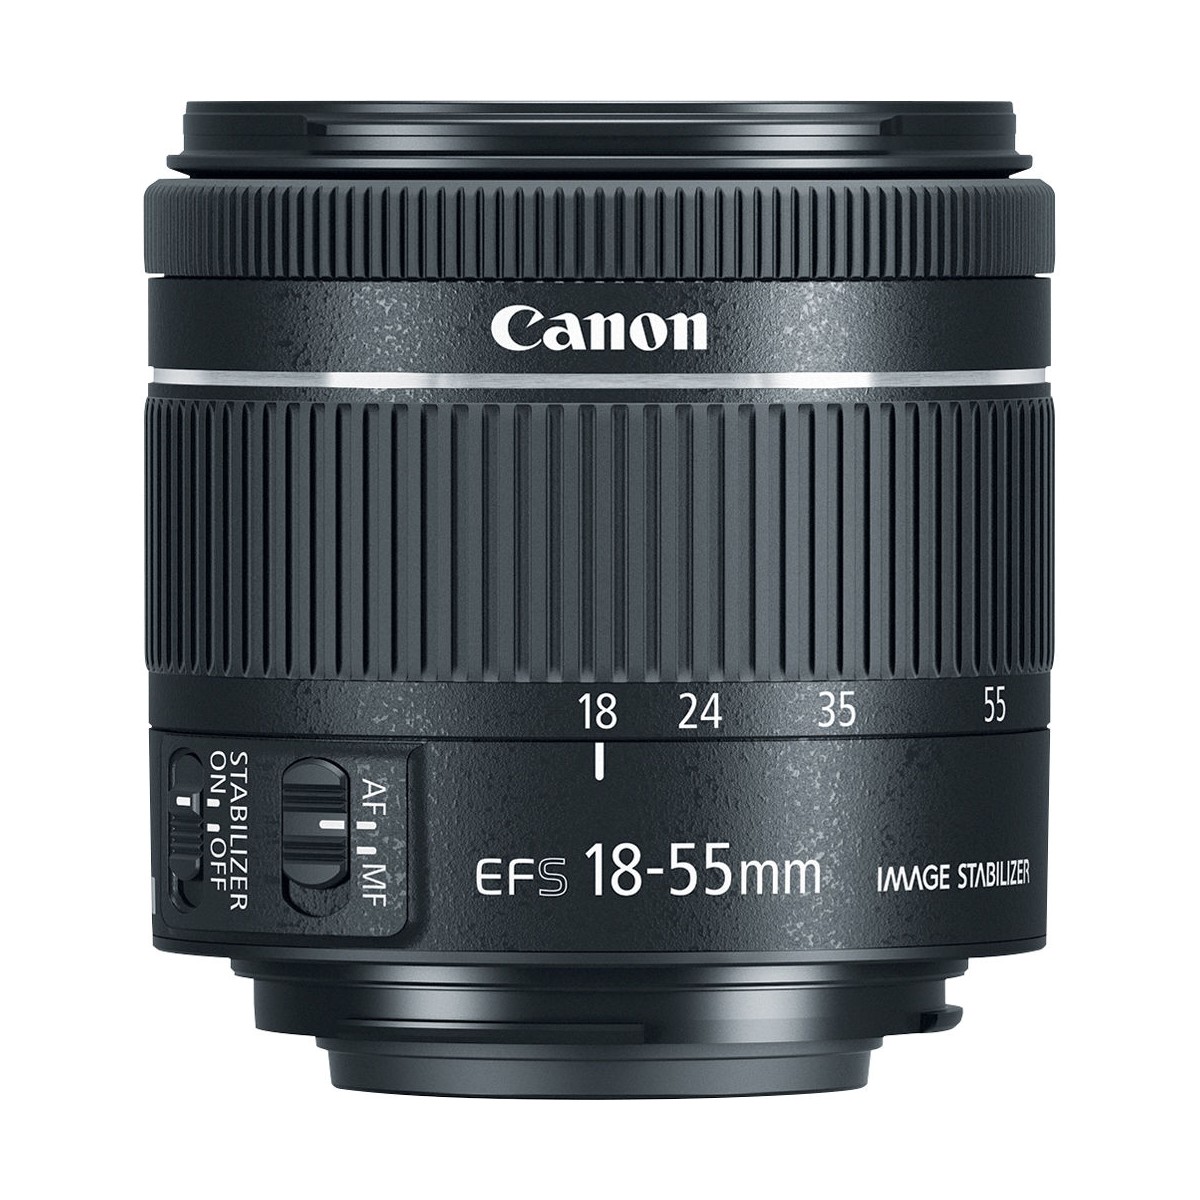 Canon EFS 18-55mm F4-5.6 IS STM - レンズ(ズーム)